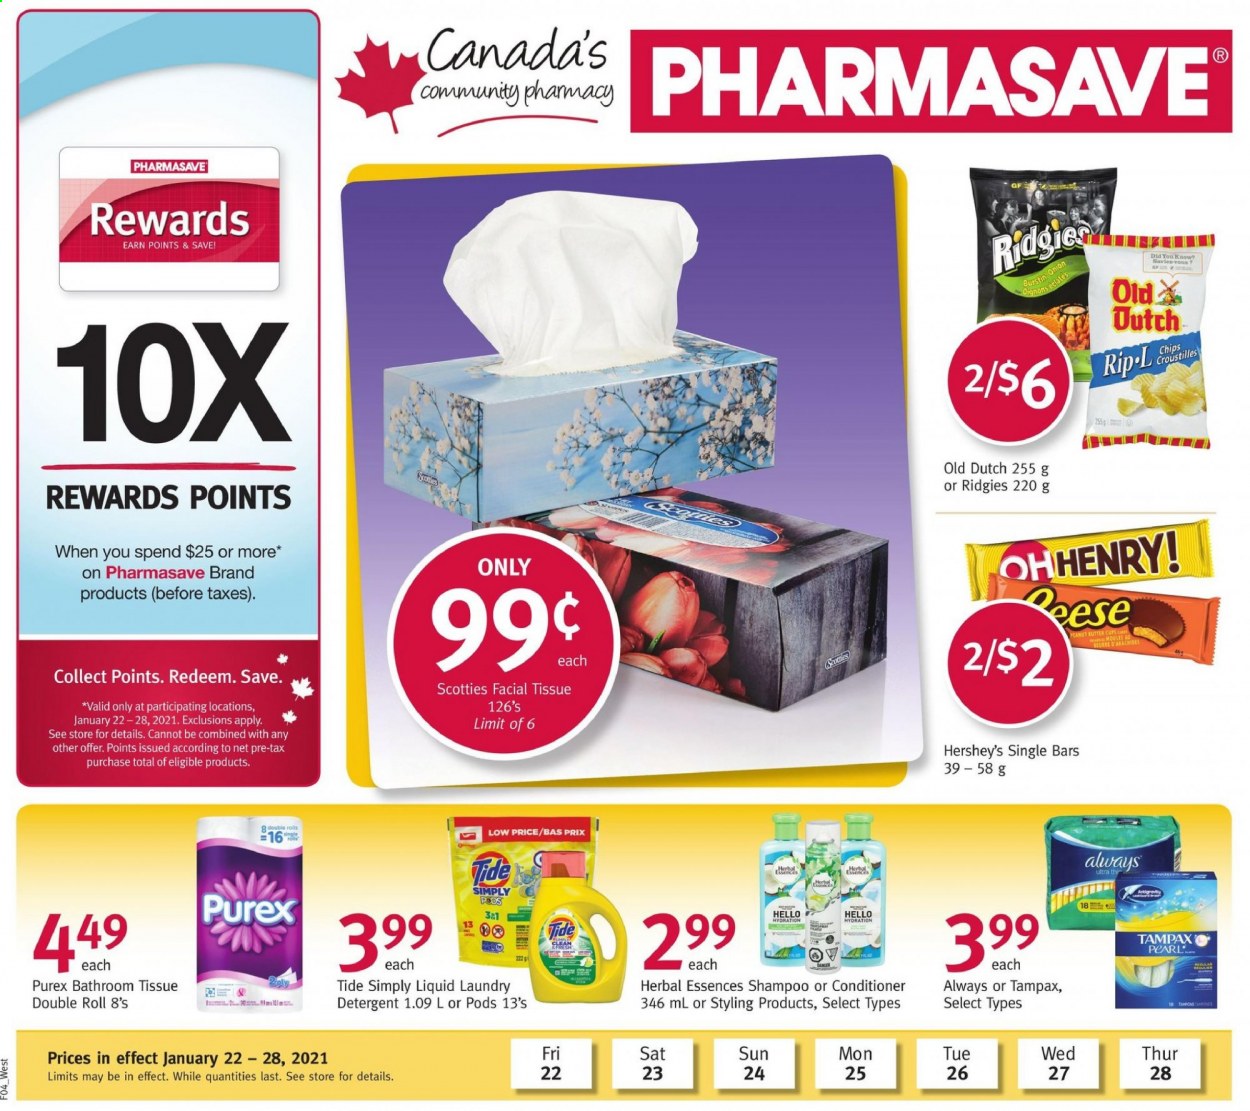 thumbnail - Pharmasave Flyer - January 22, 2021 - January 28, 2021 - Sales products - onion, butter, Hershey's, bath tissue, Tide, laundry detergent, Purex, conditioner, Herbal Essences, shampoo, Tampax, chips. Page 1.